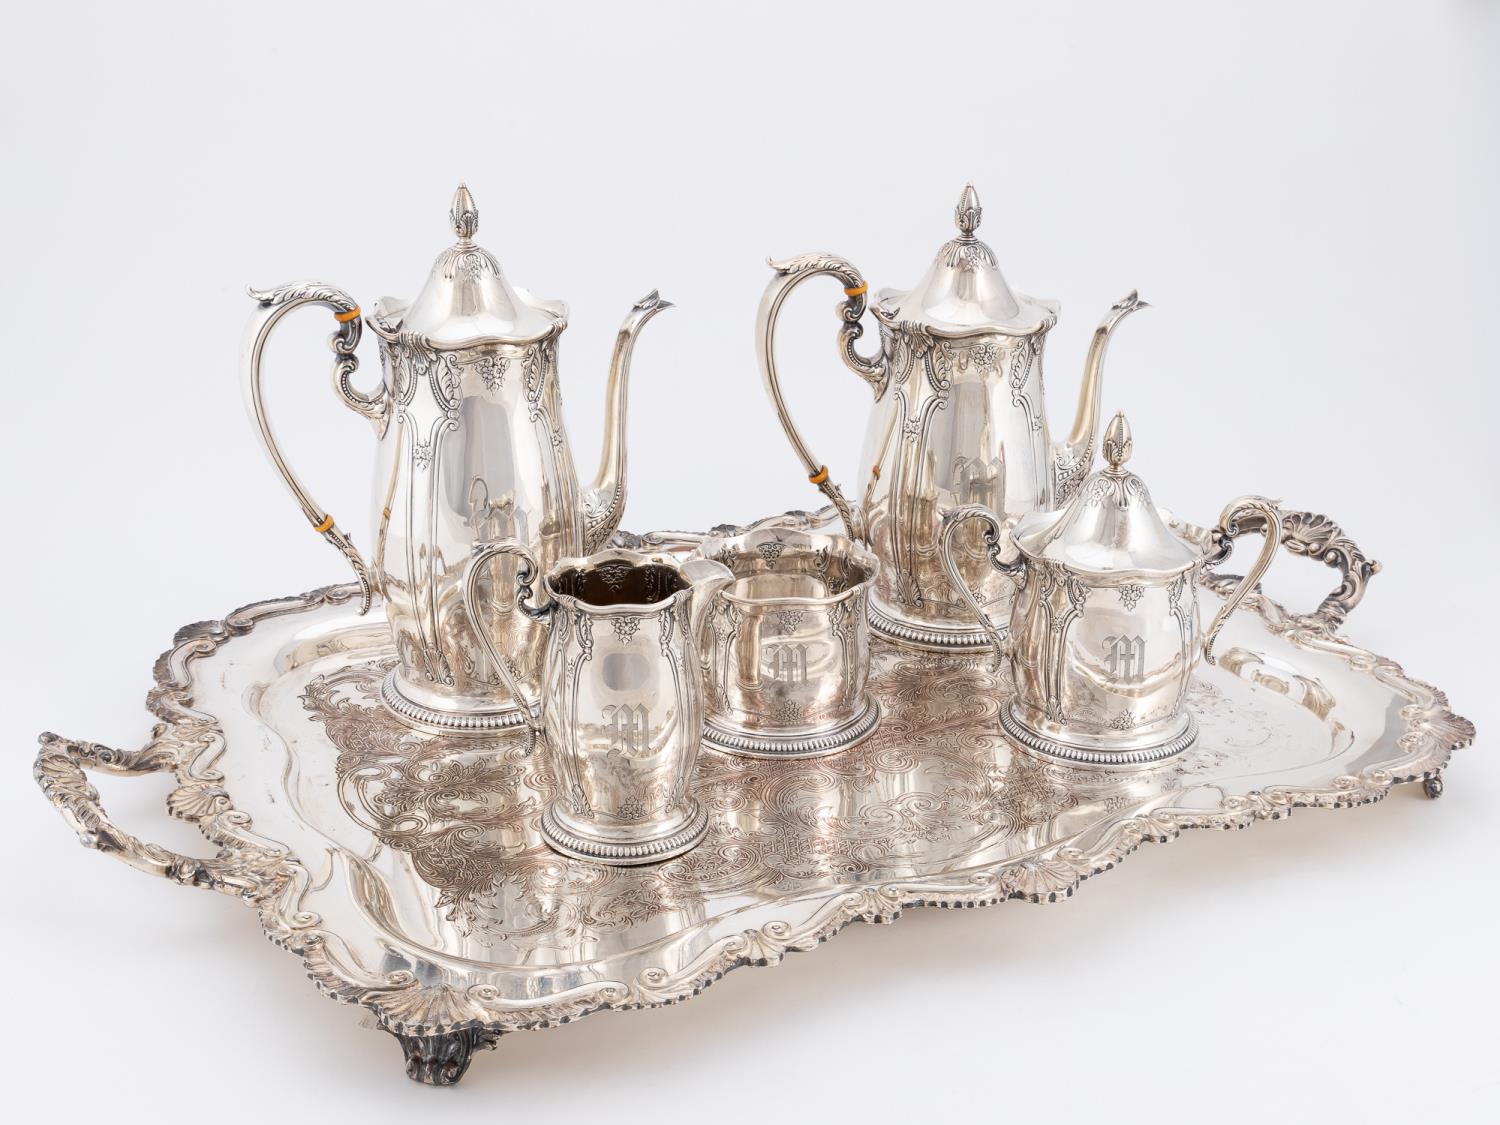 WALLACE STERLING 5PC TEA SERVICE